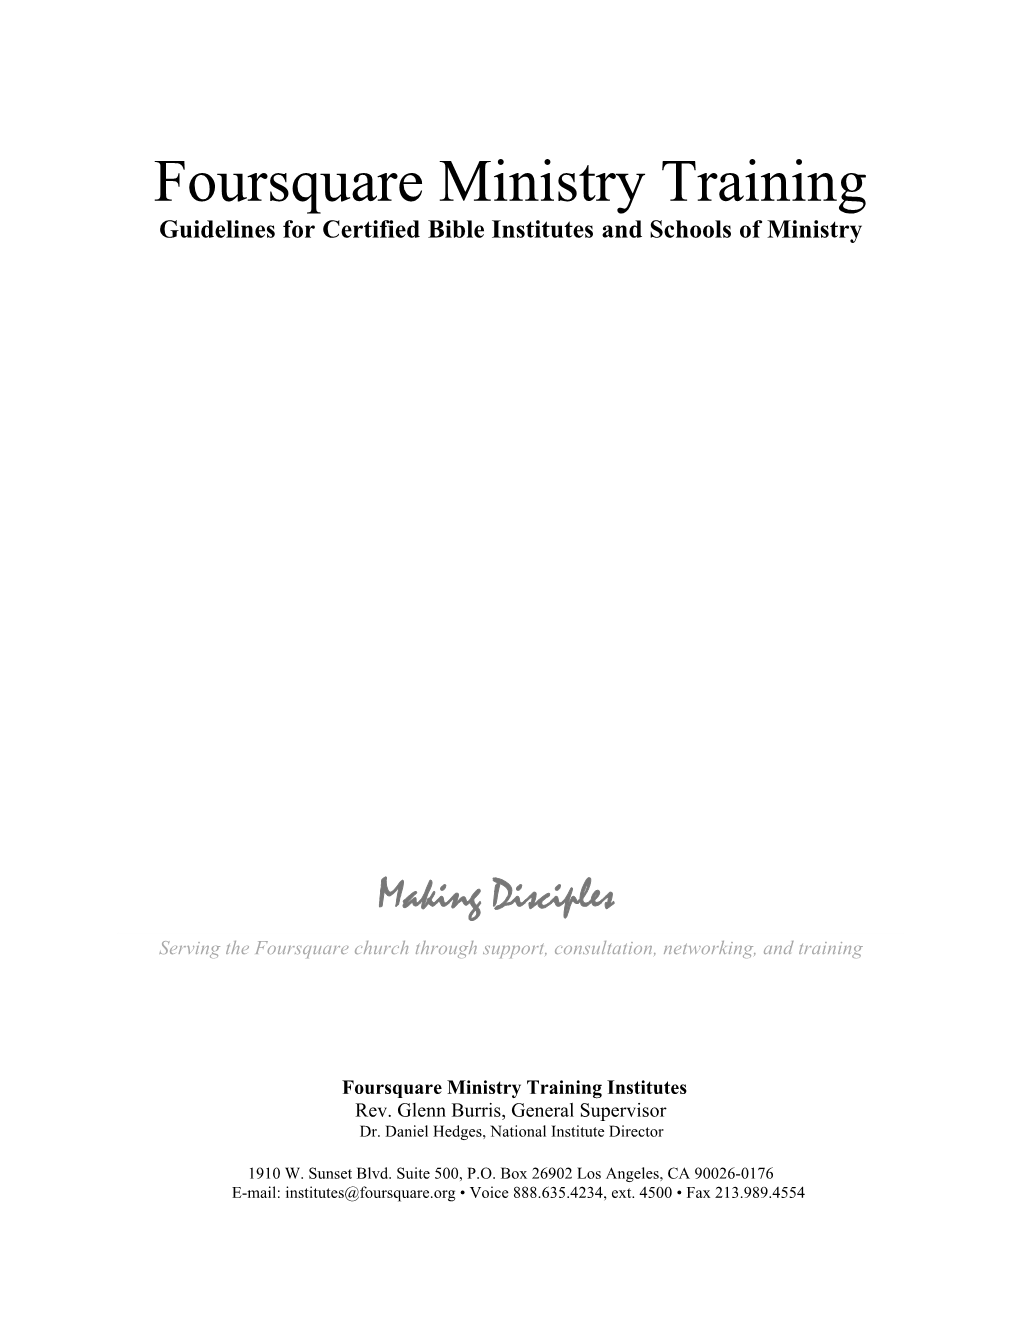 Foursquare Ministry Training Guidelines for Certified Bible Institutes and Schools of Ministry